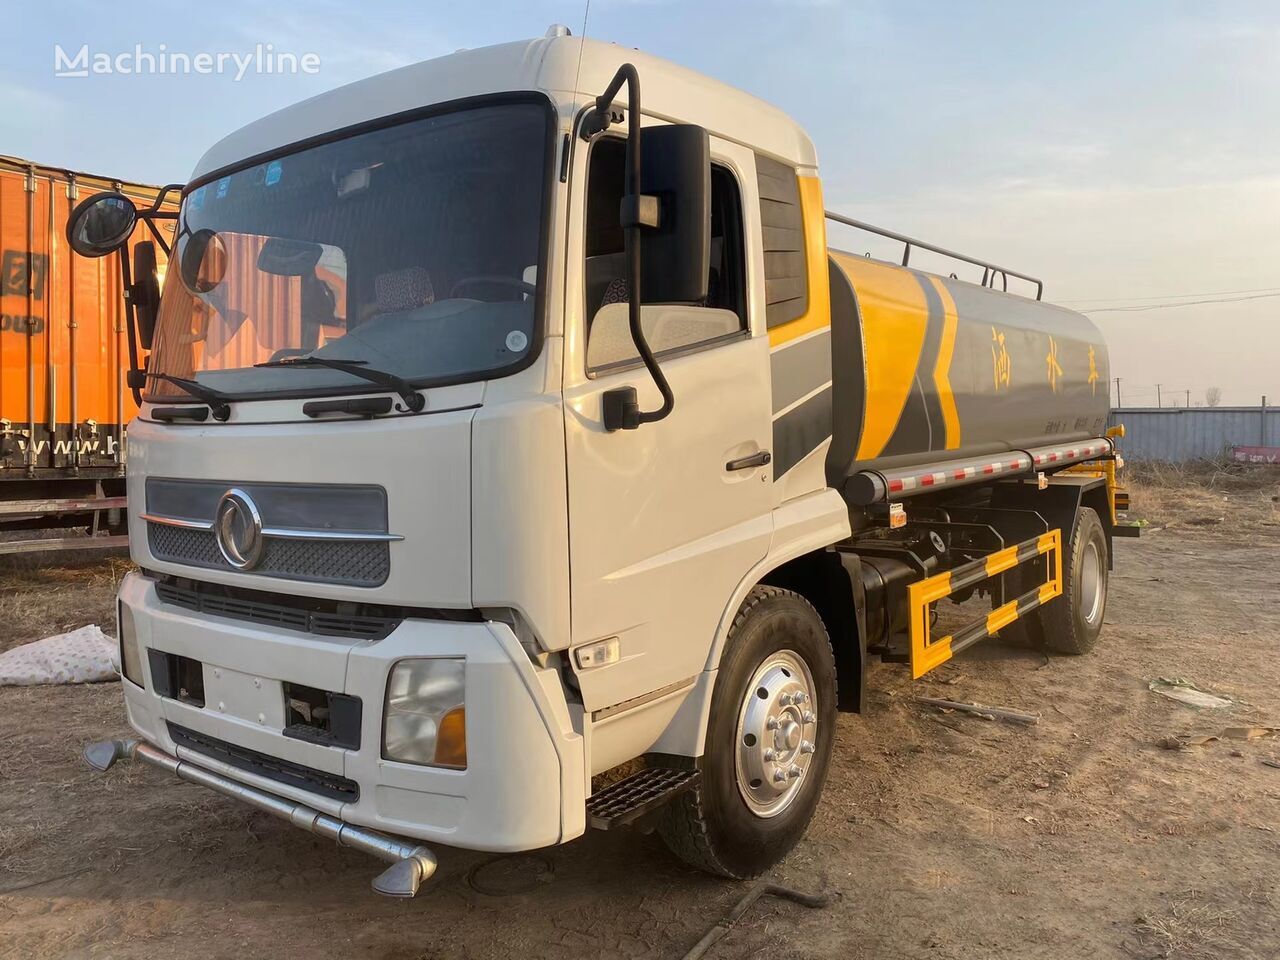 Municipal/ Special vehicle, Tank truck Dongfeng 4x2 drive 12 tons water tank capacity truck: picture 3